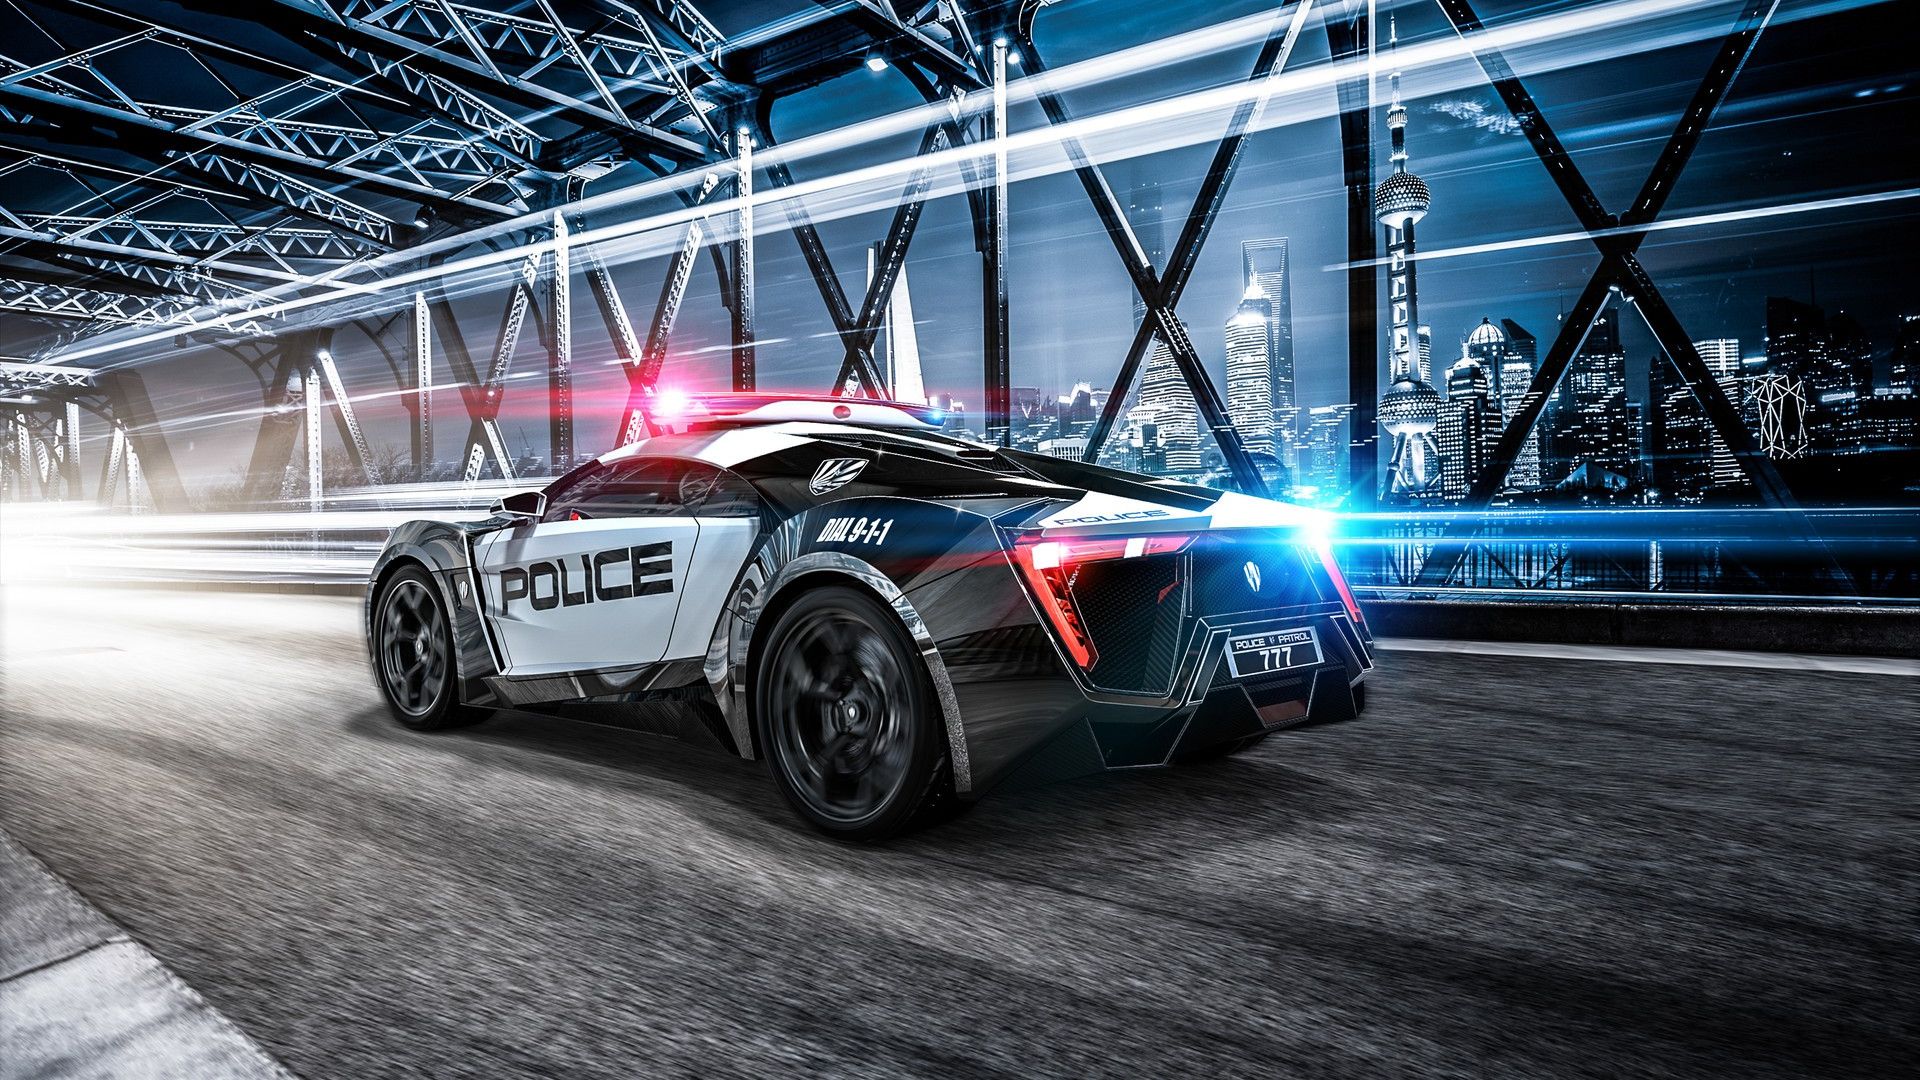 Desktop Wallpaper Police Car From Video Game, Hd Image, Picture,  Background, Pnen4y